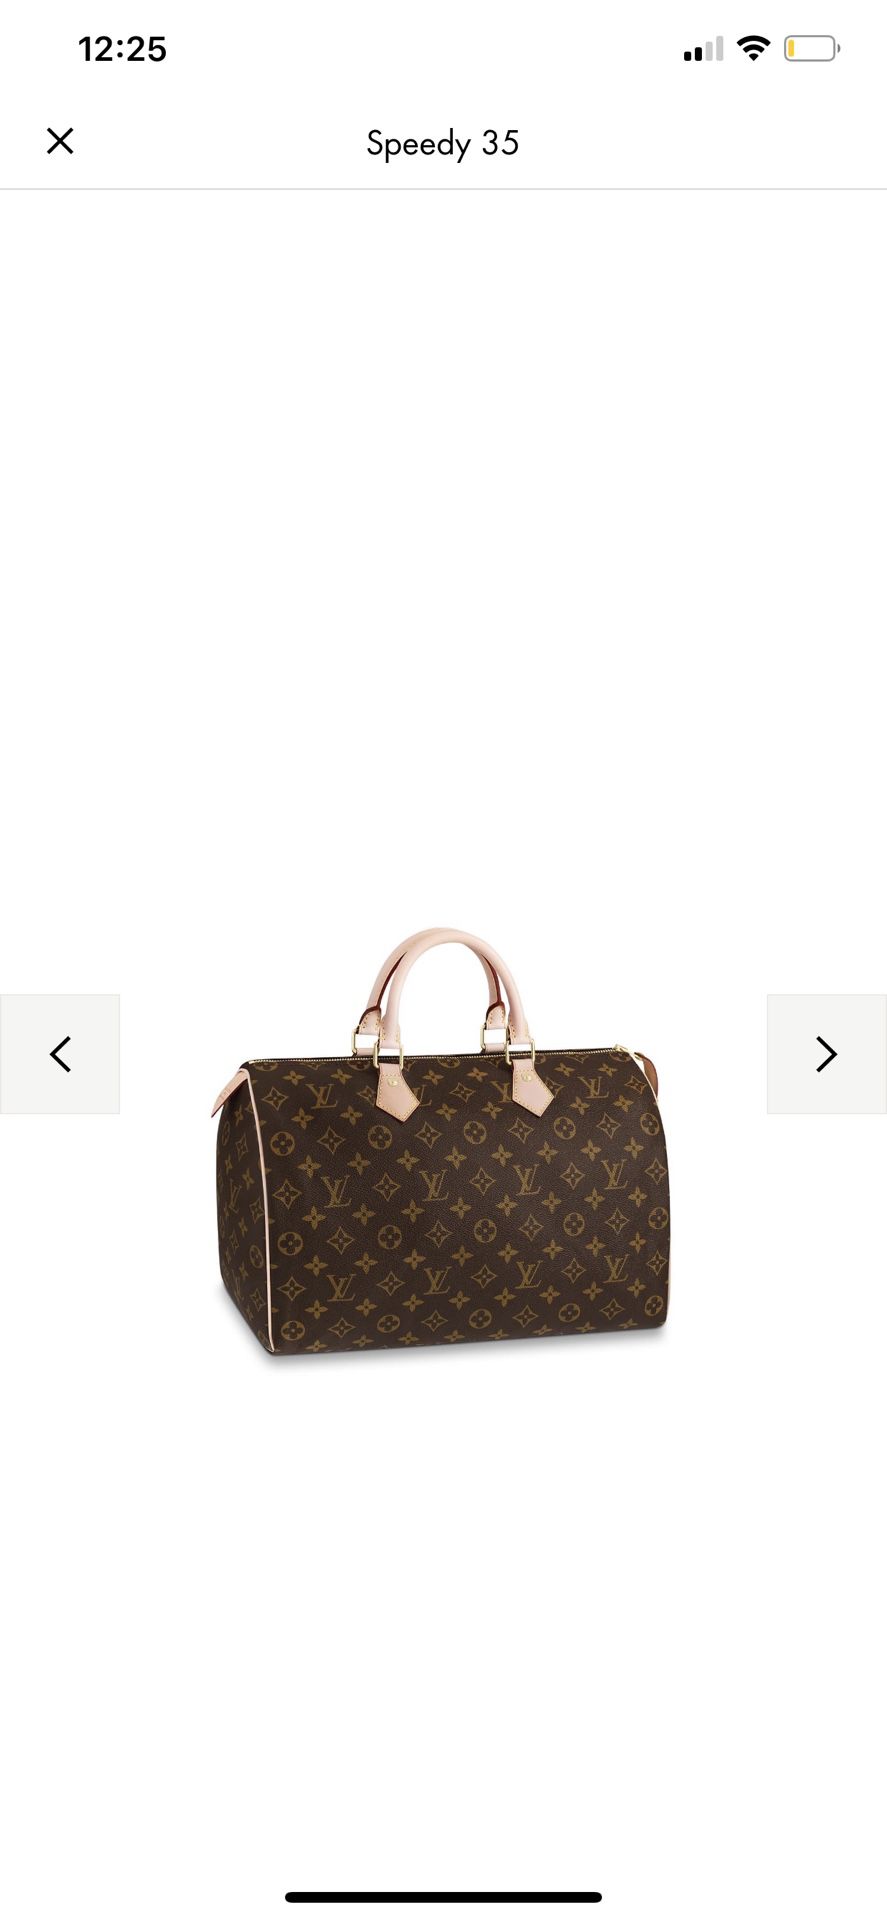 Authentic Louis Vuitton 35 speedy have too for sale